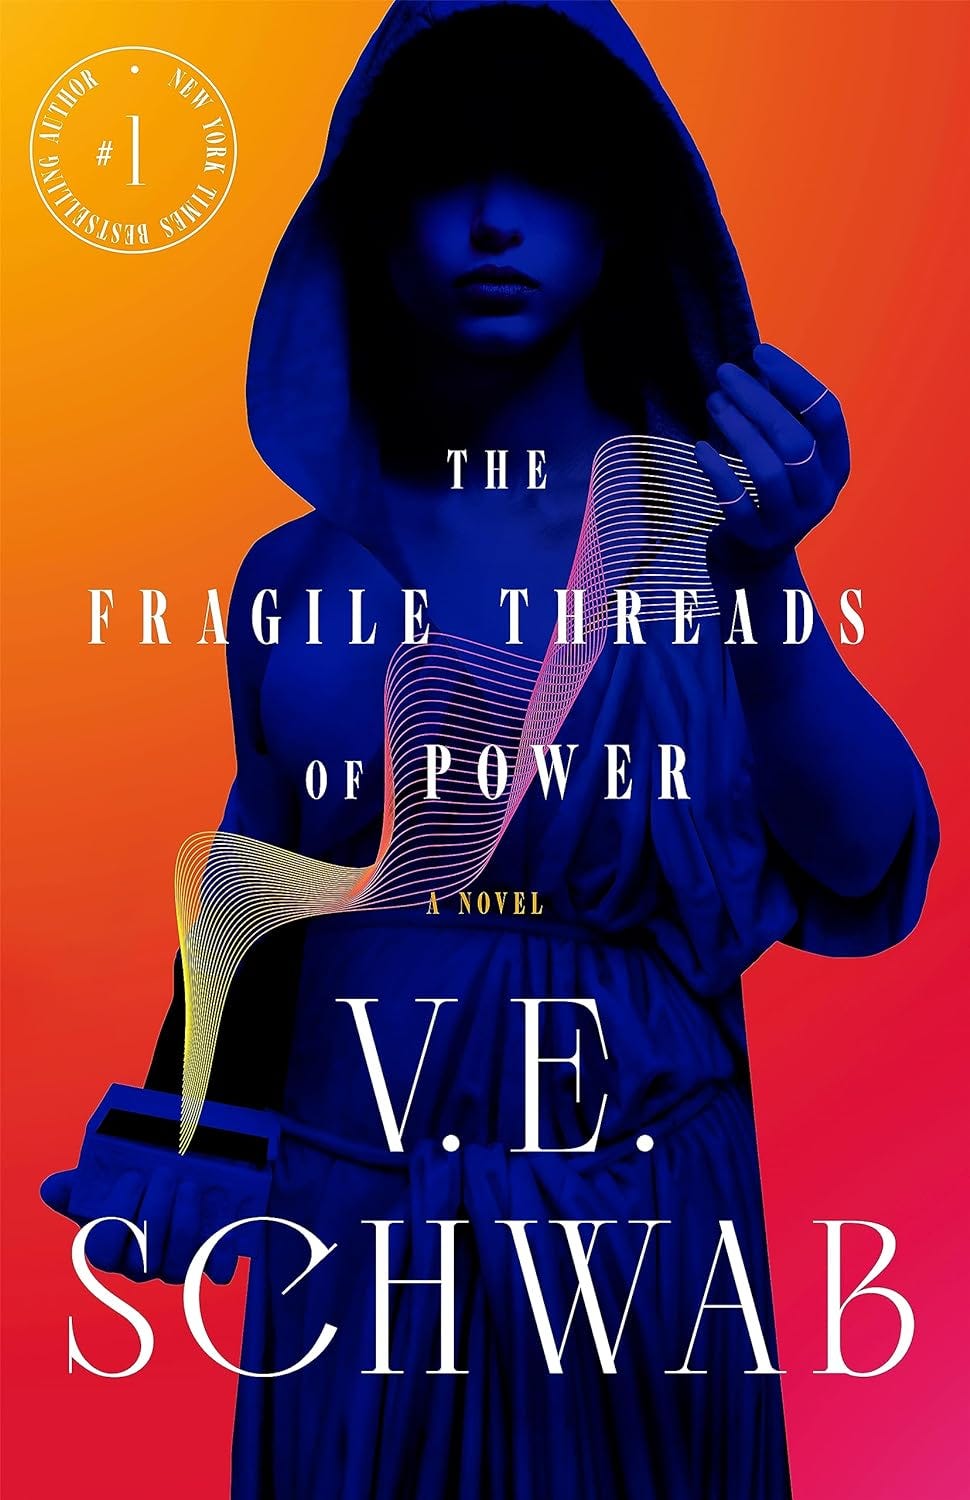 The cover for The Fragile Threads of Power shows a shadowy figure in purple on a red background